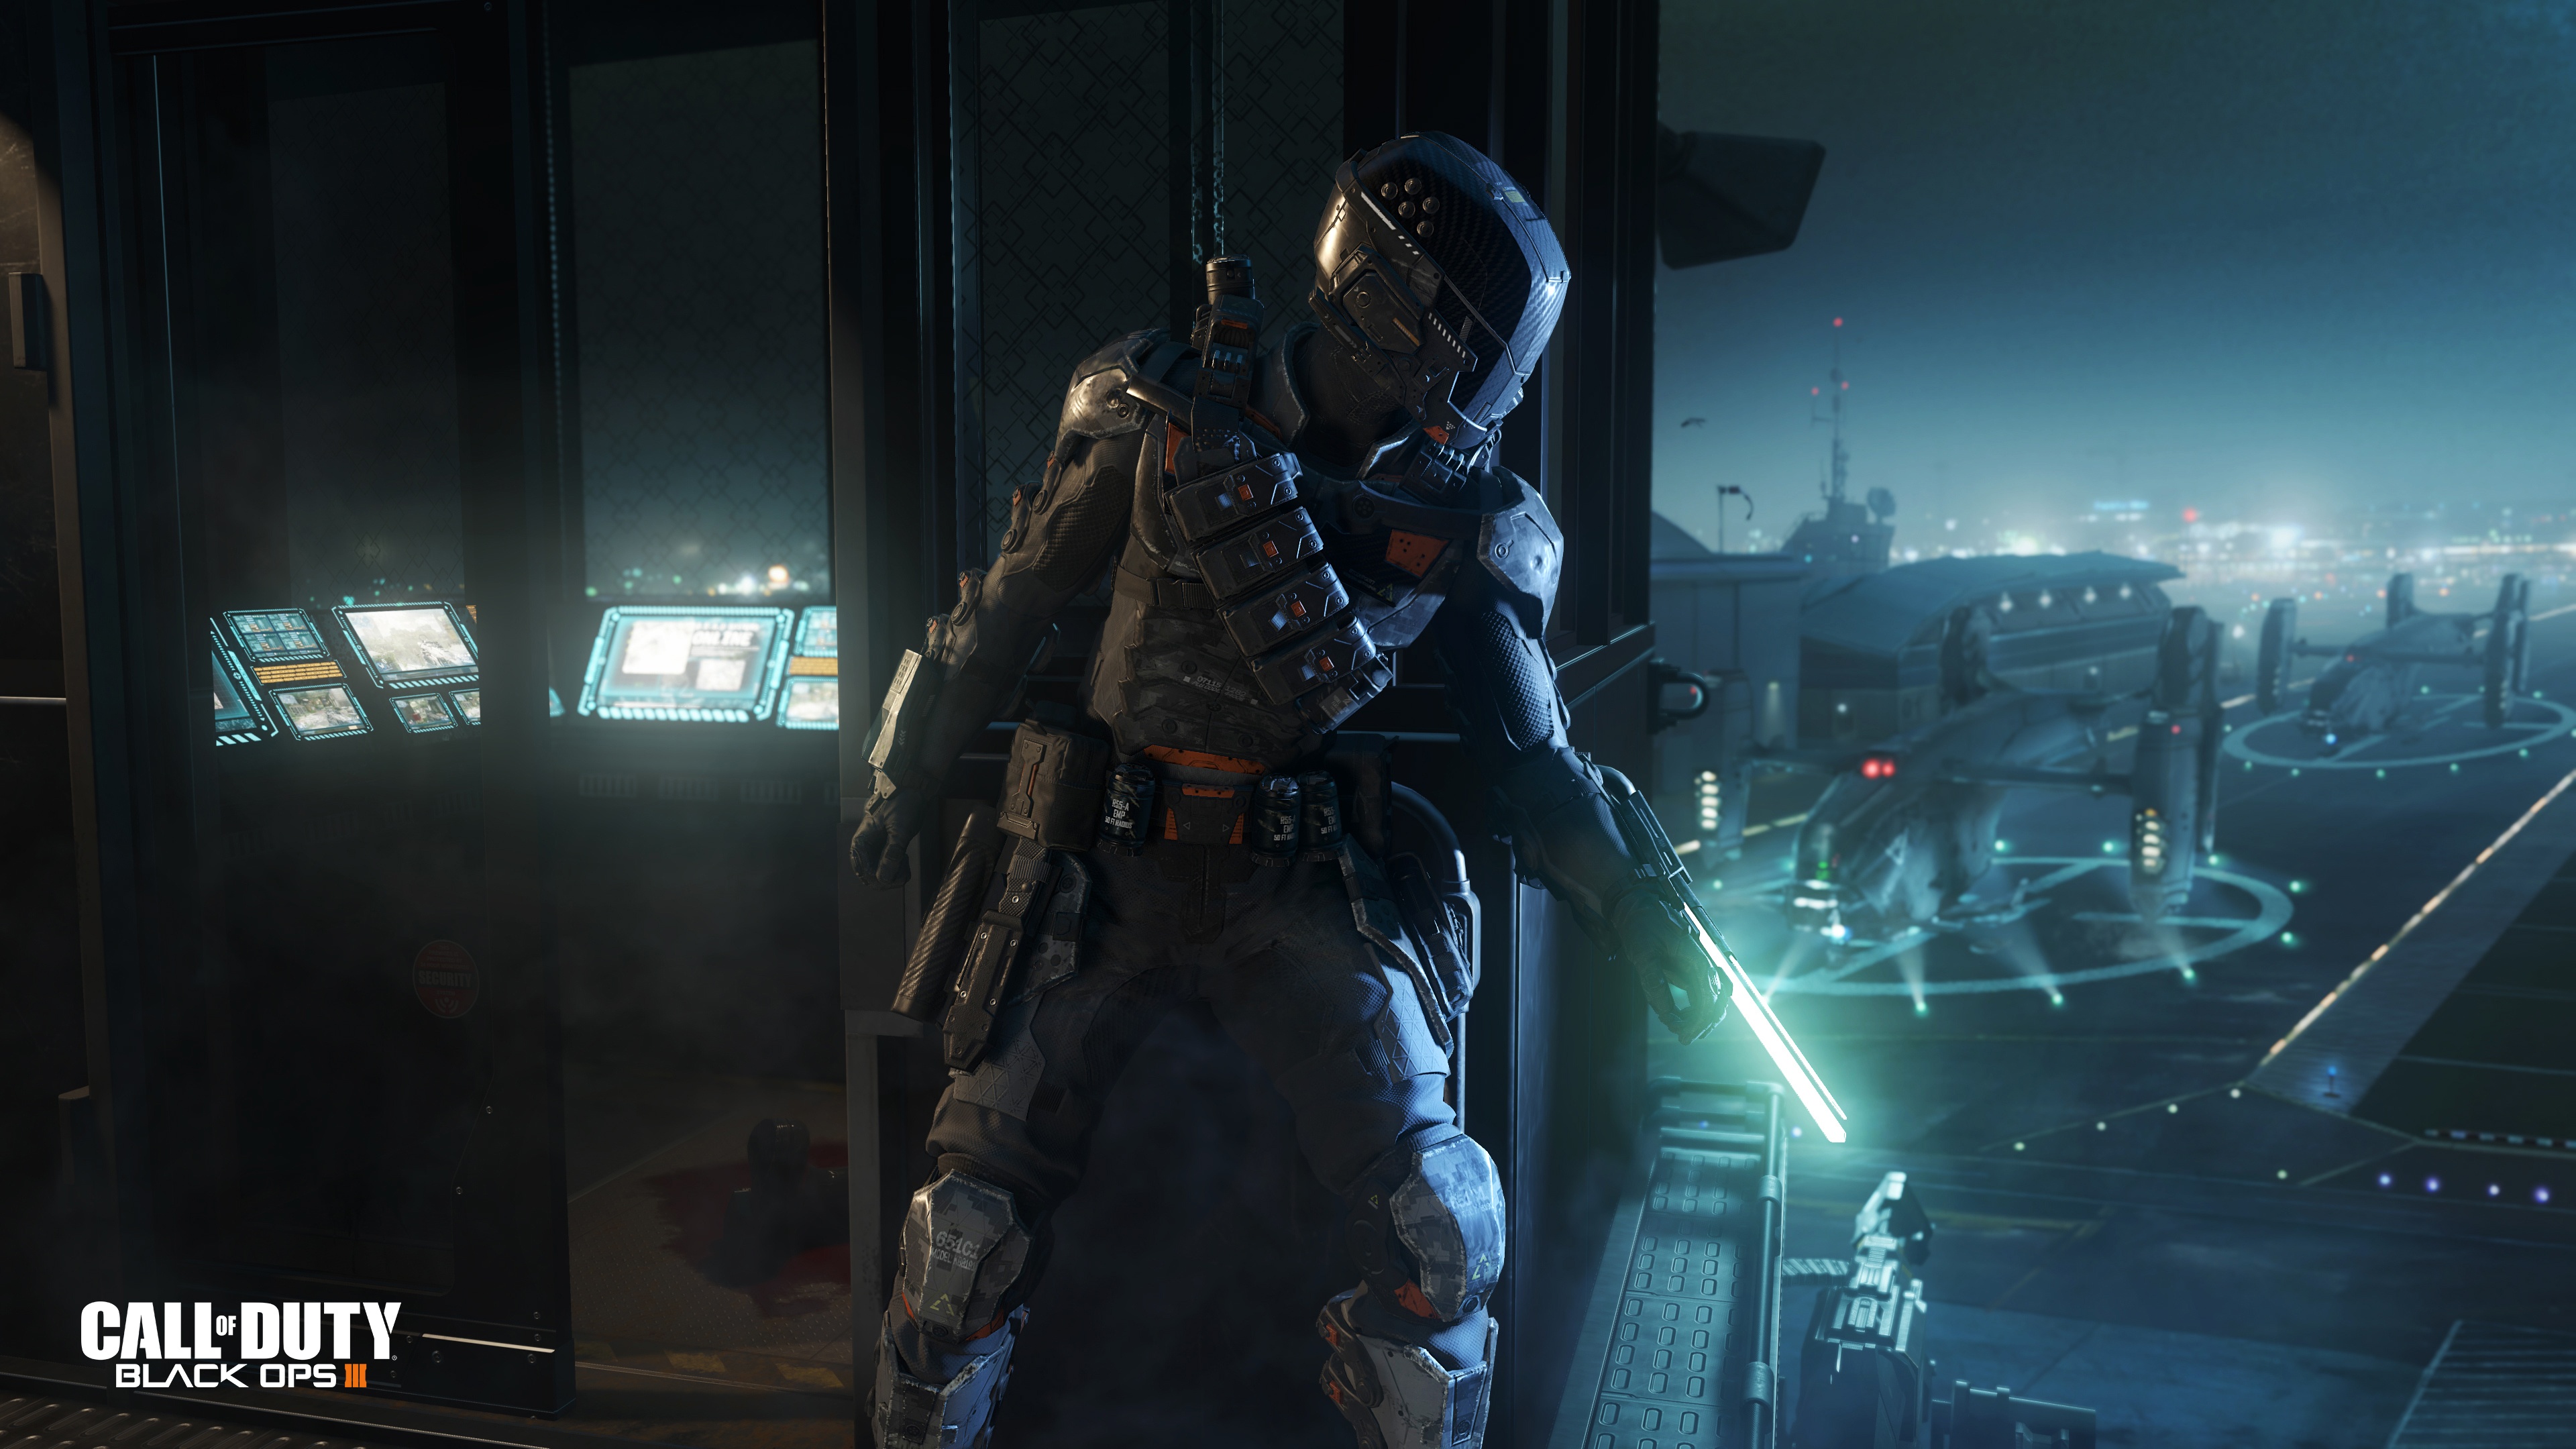 call of duty black ops 3 spectre 3840 x 216023